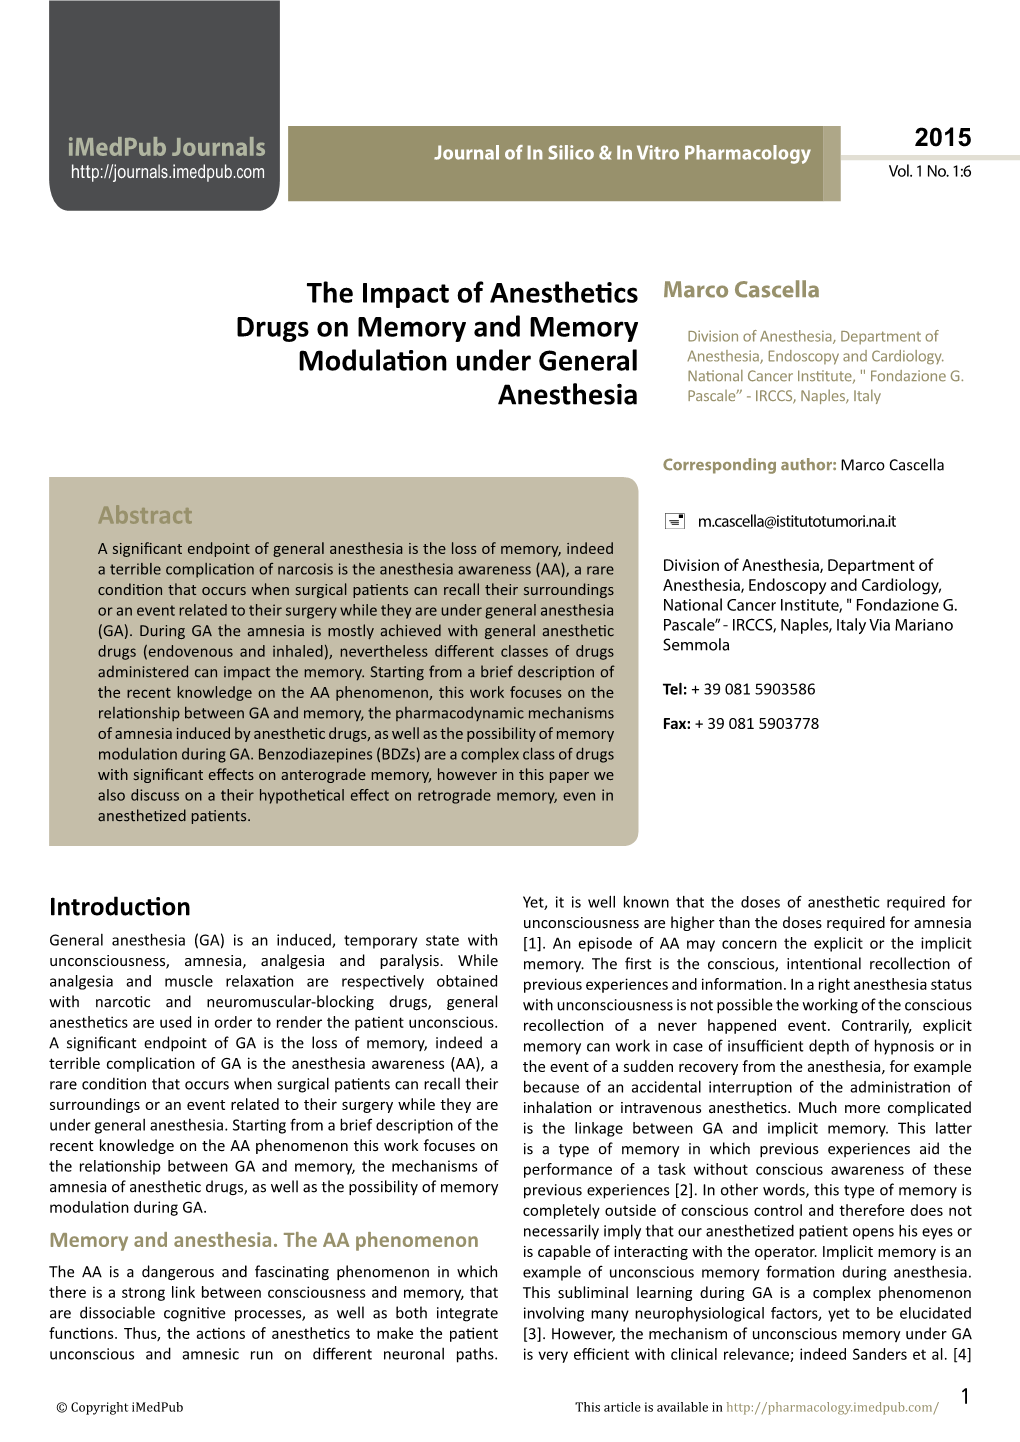 The Impact of Anesthetics Drugs on Memory and Memory Modulation